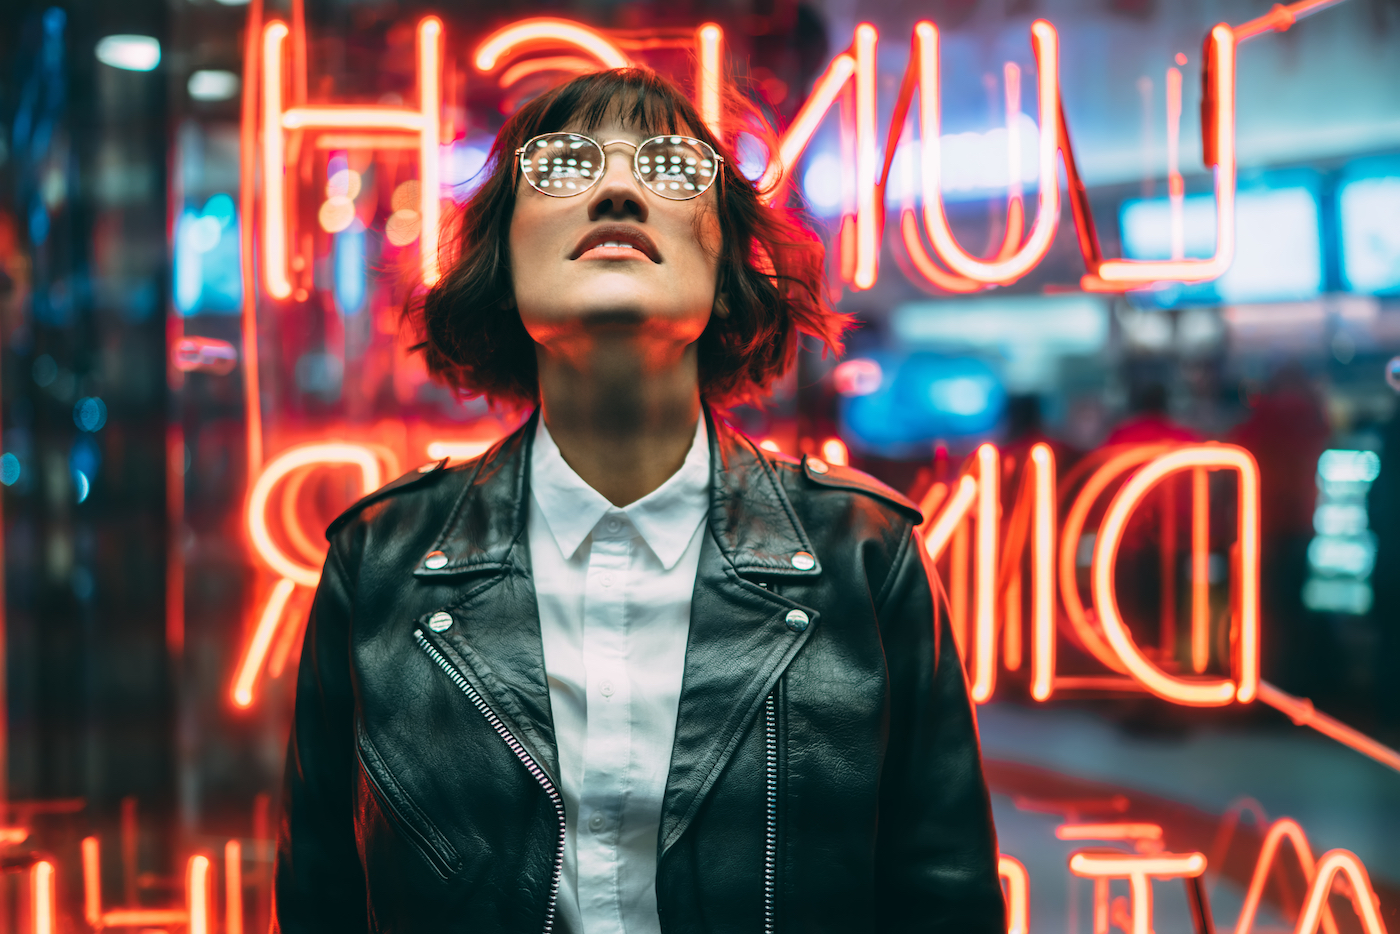 Woman standing in front of window with neon signage, looking upward and  enjoying a night out